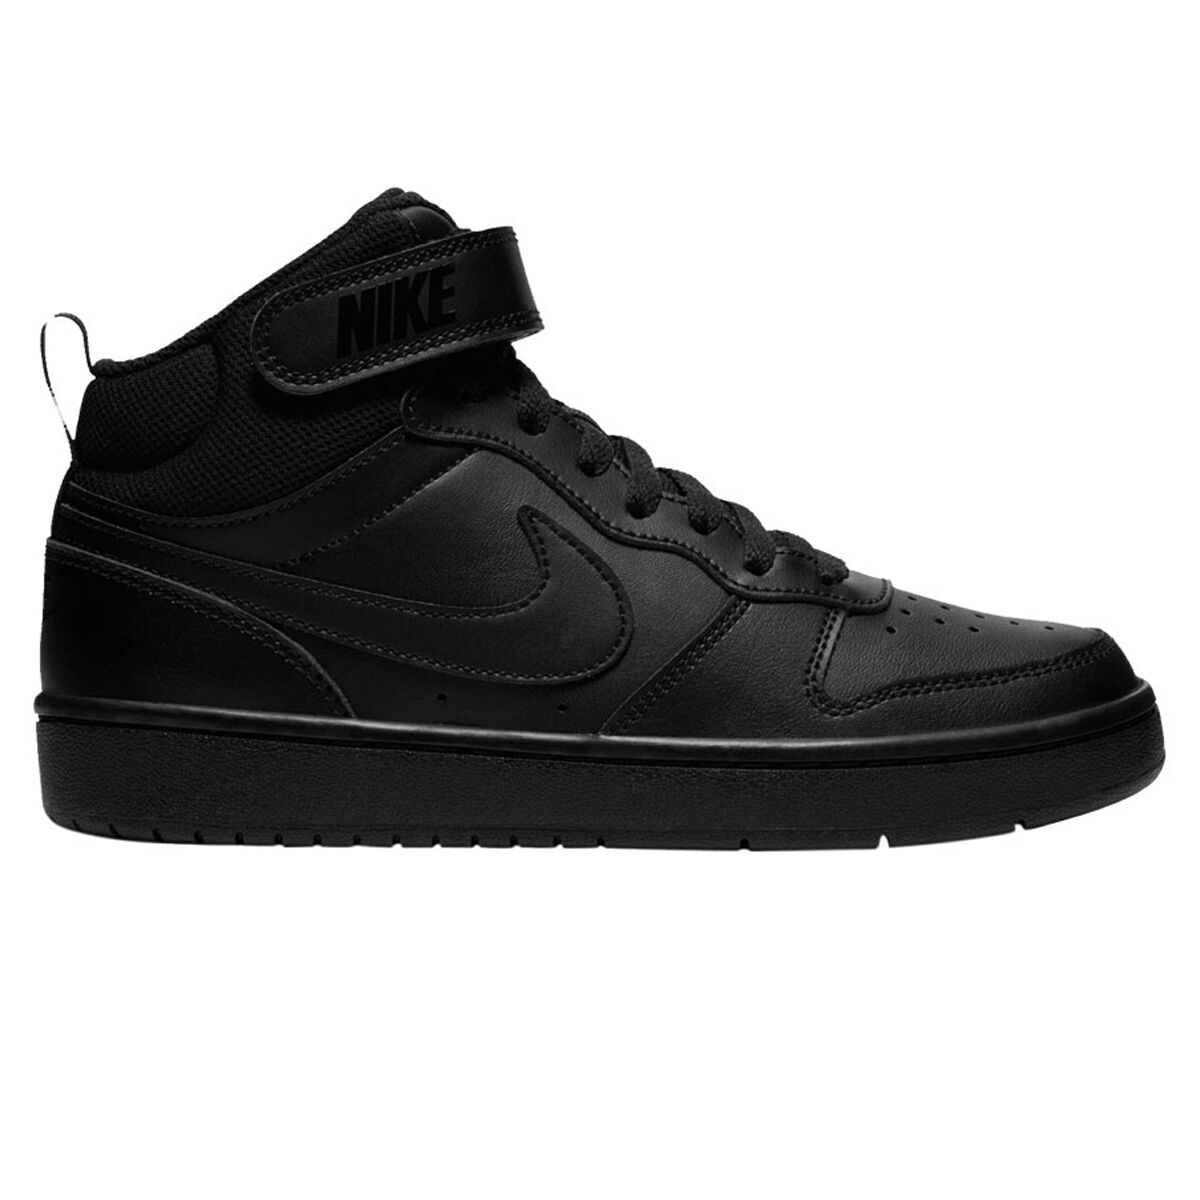 Nike Court Borough Mid 2 GS Kids Casual Shoes | Rebel Sport